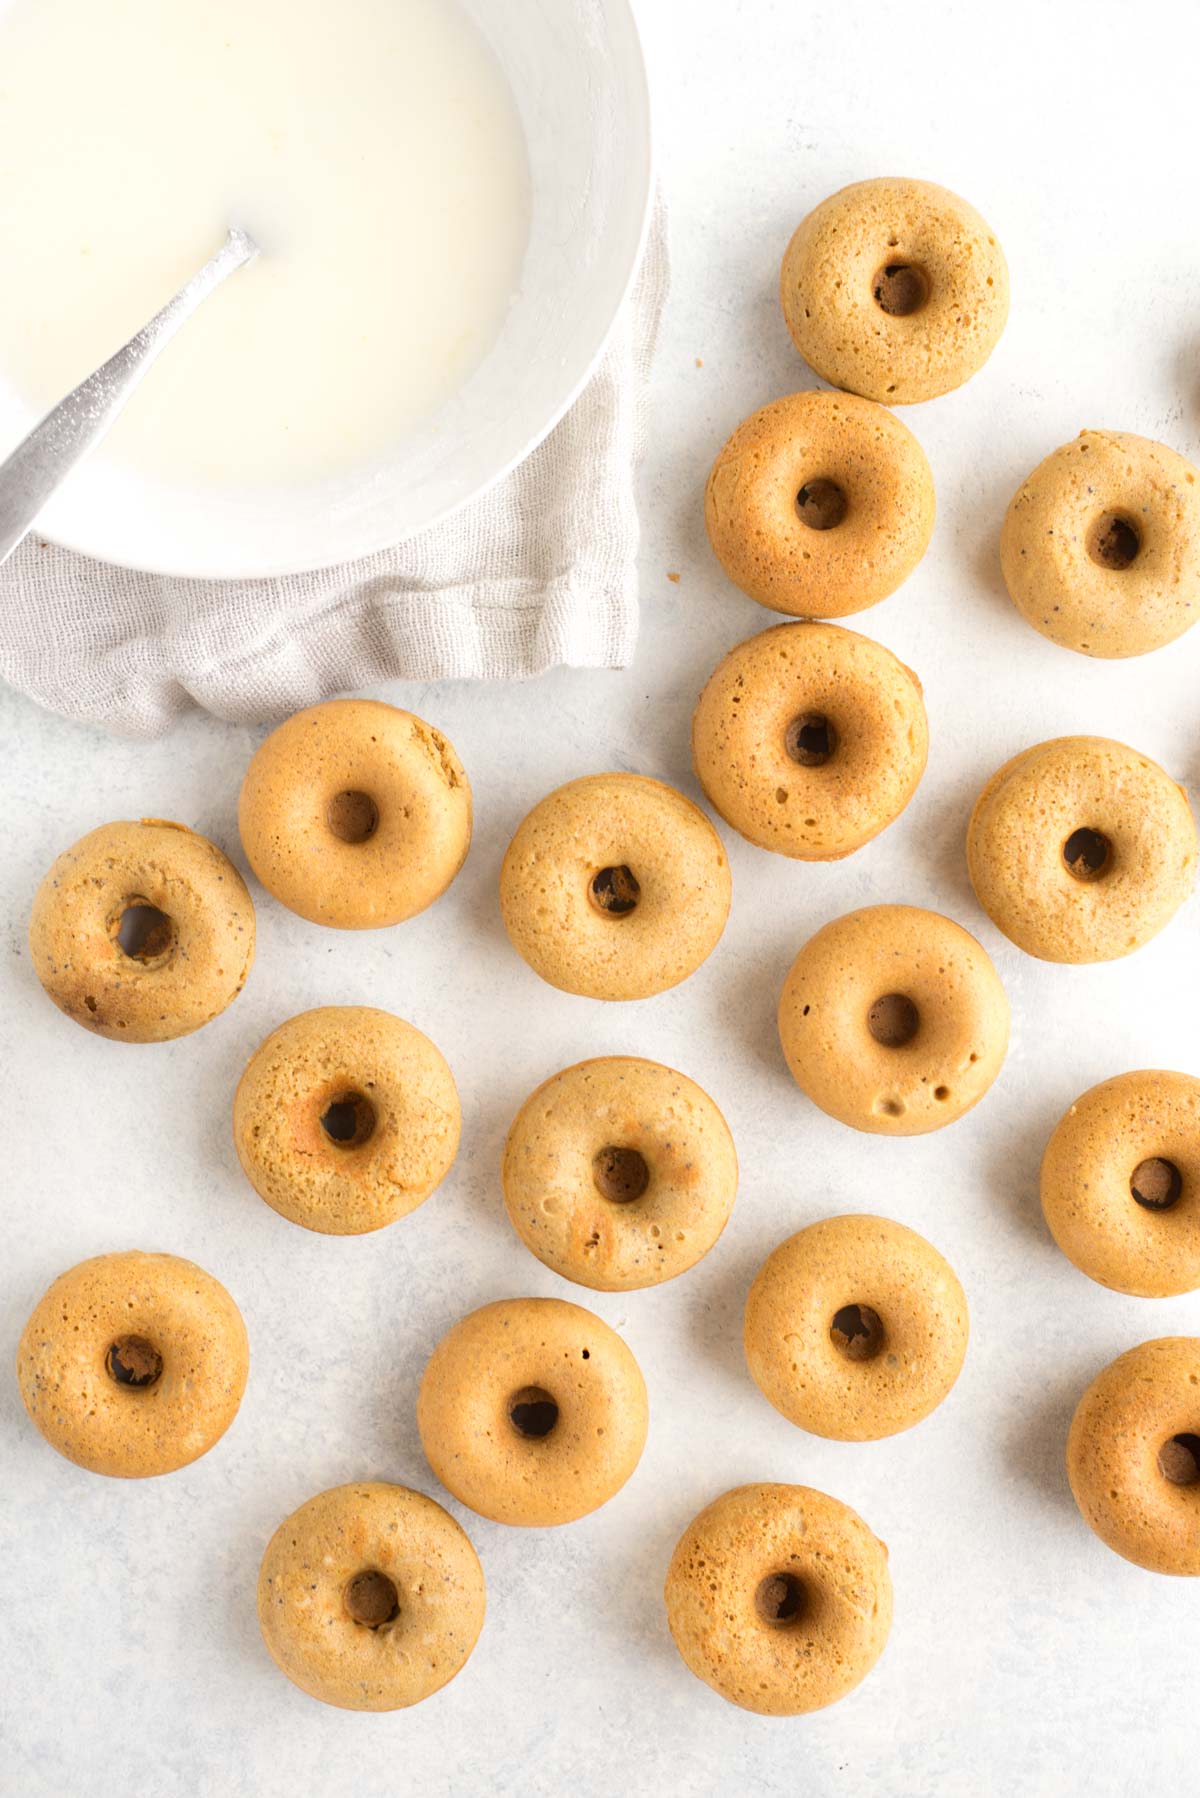 These easy lemon old-fashioned gluten-free donuts are low carbohydrate, high protein and high in fiber. 